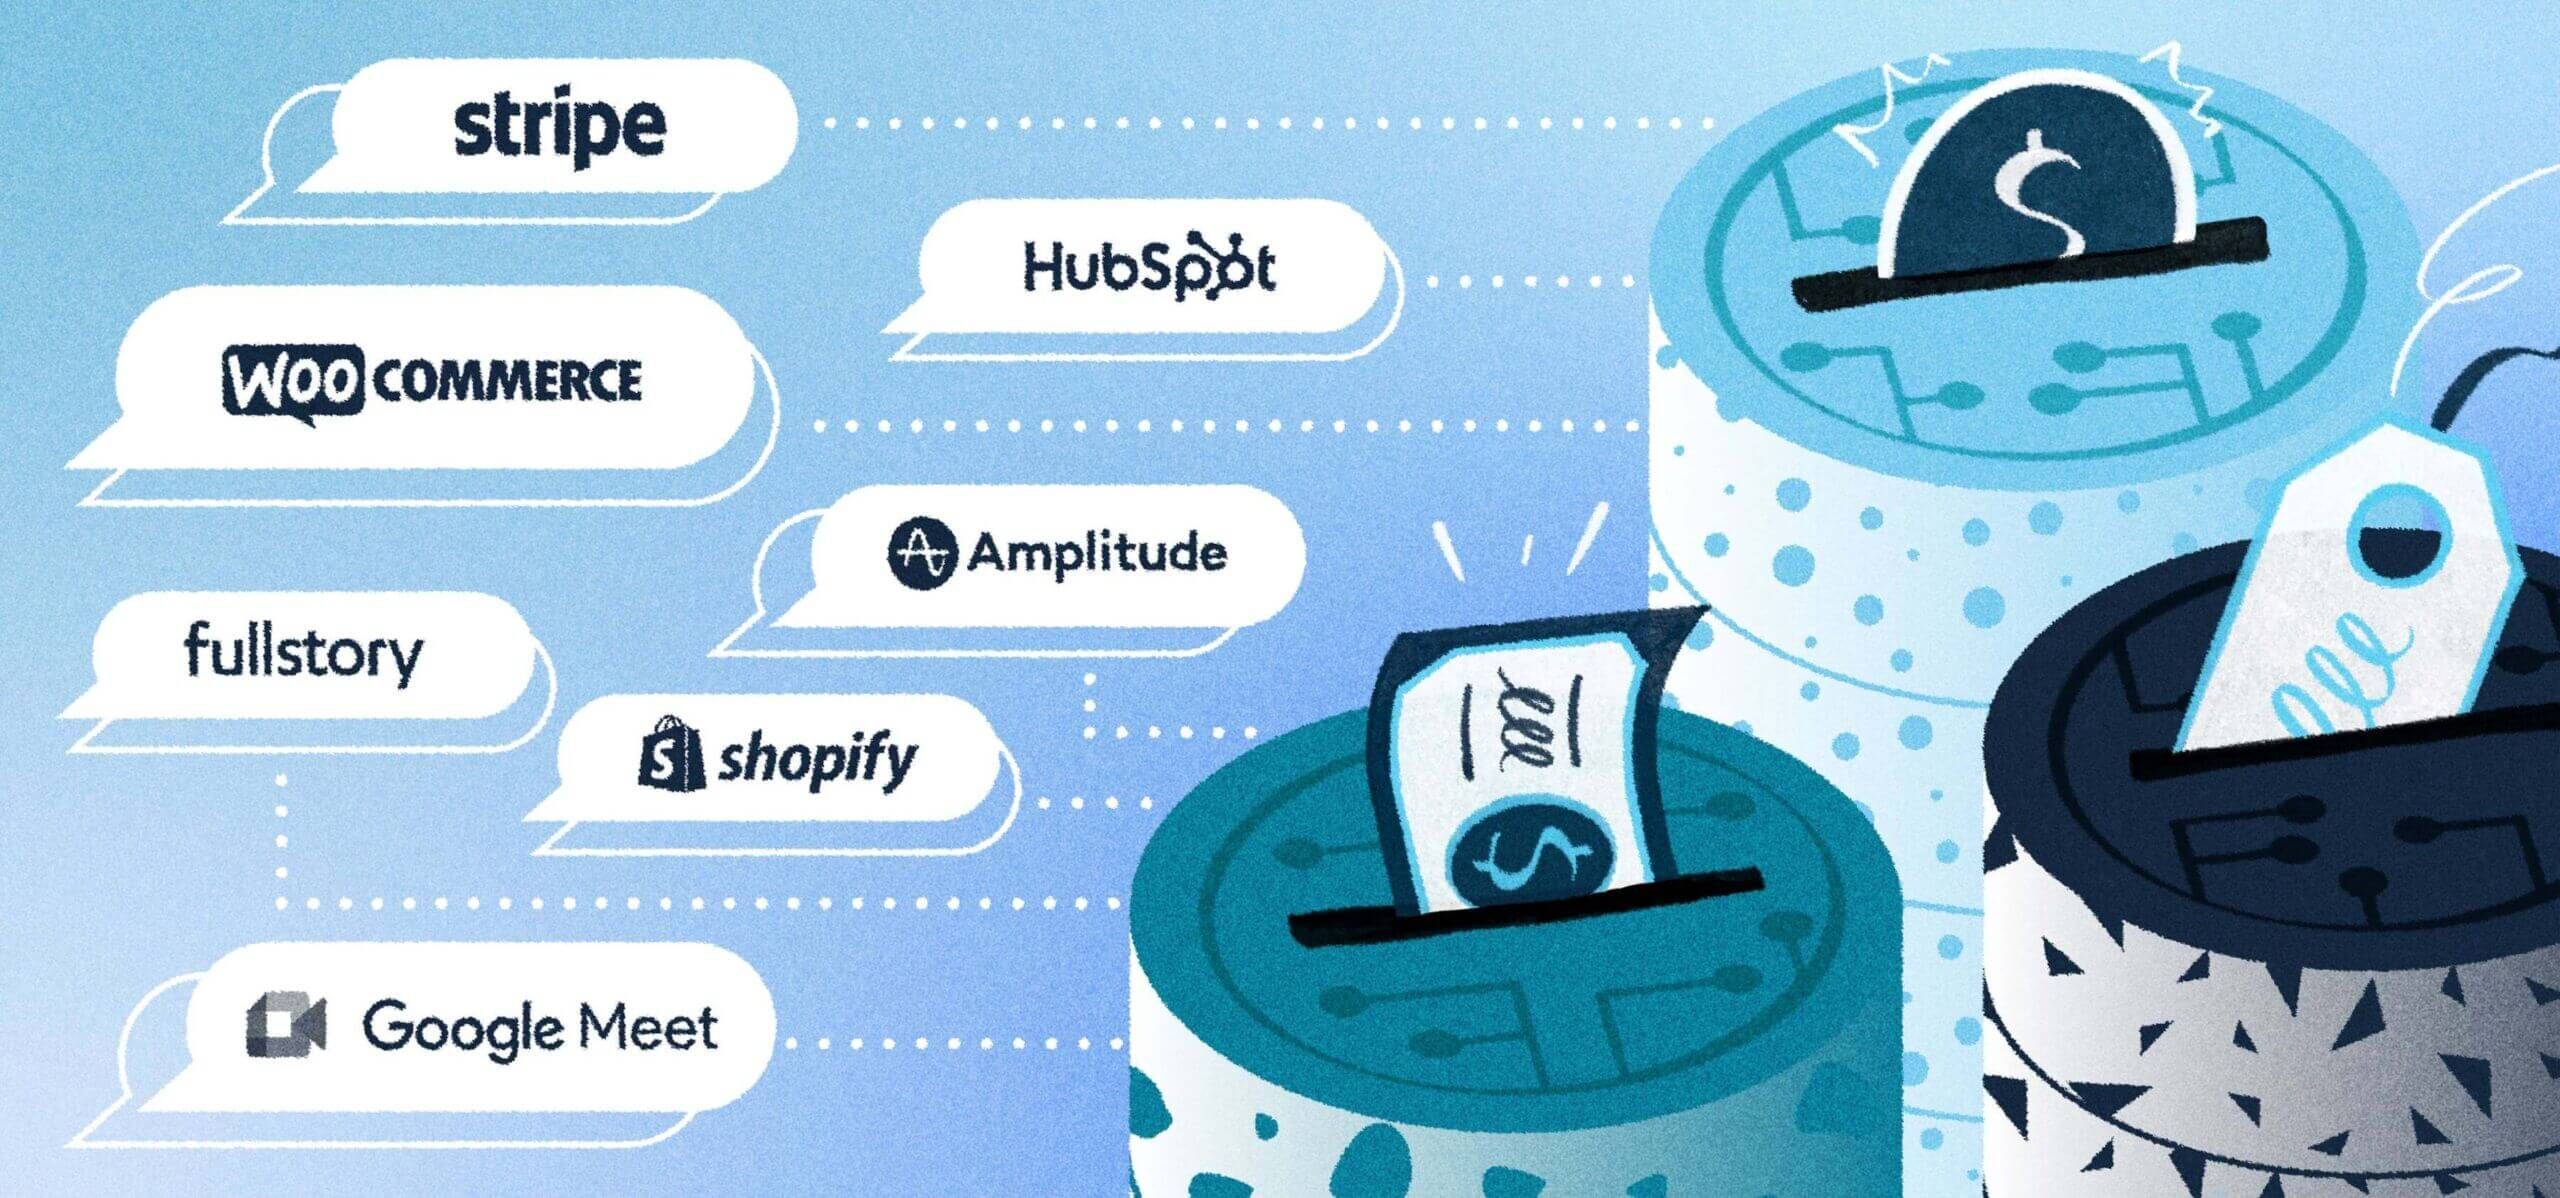 Shopify aims to woo larger clients with a new stack for enterprise retail